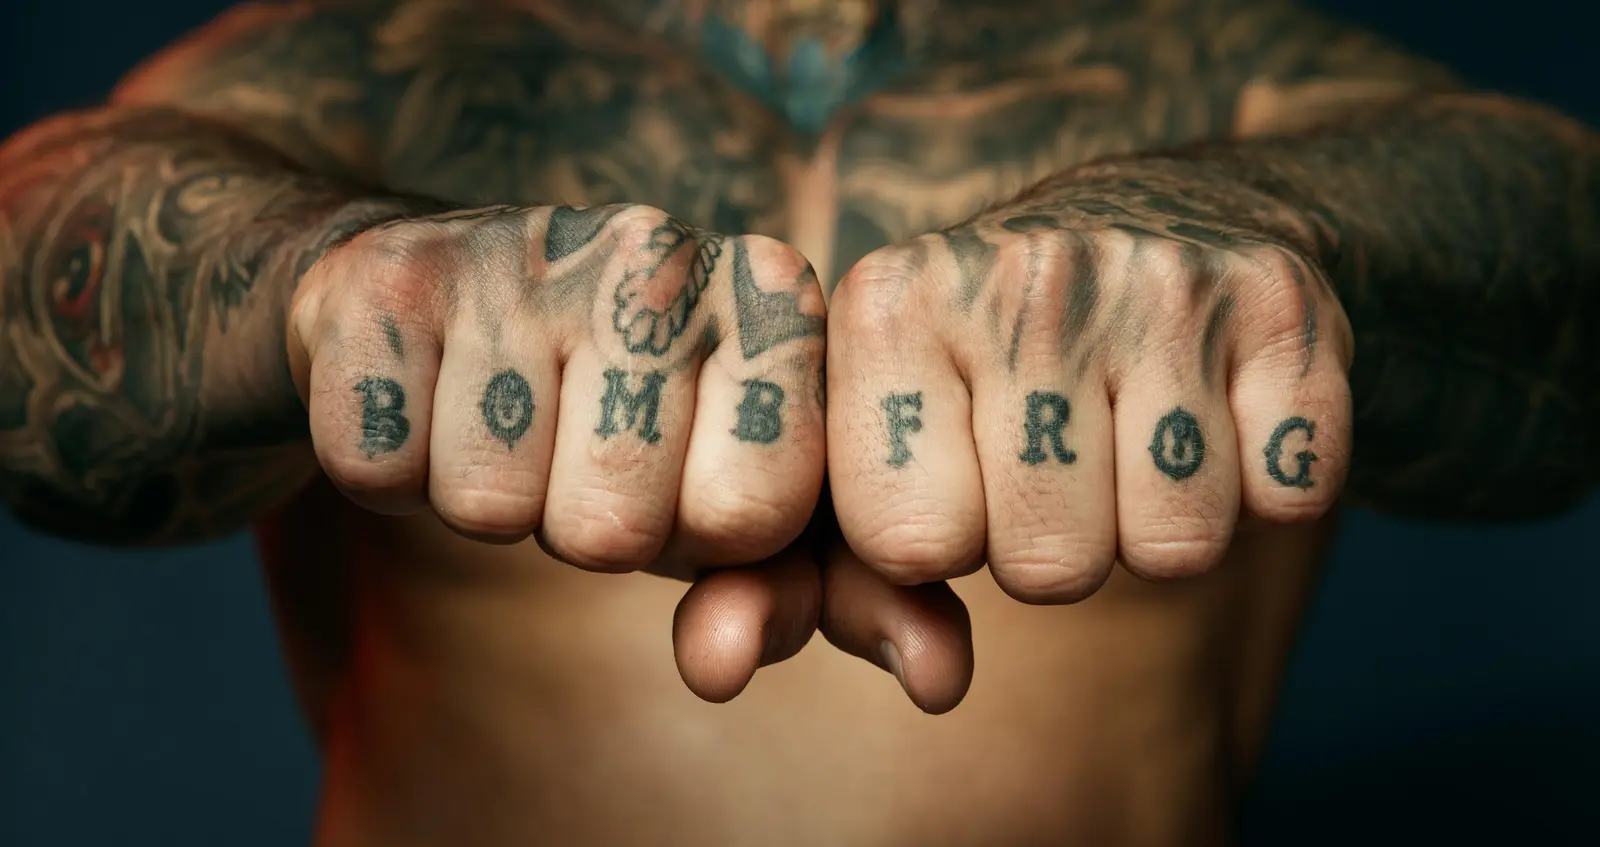 Michael Bell knuckle tattoos